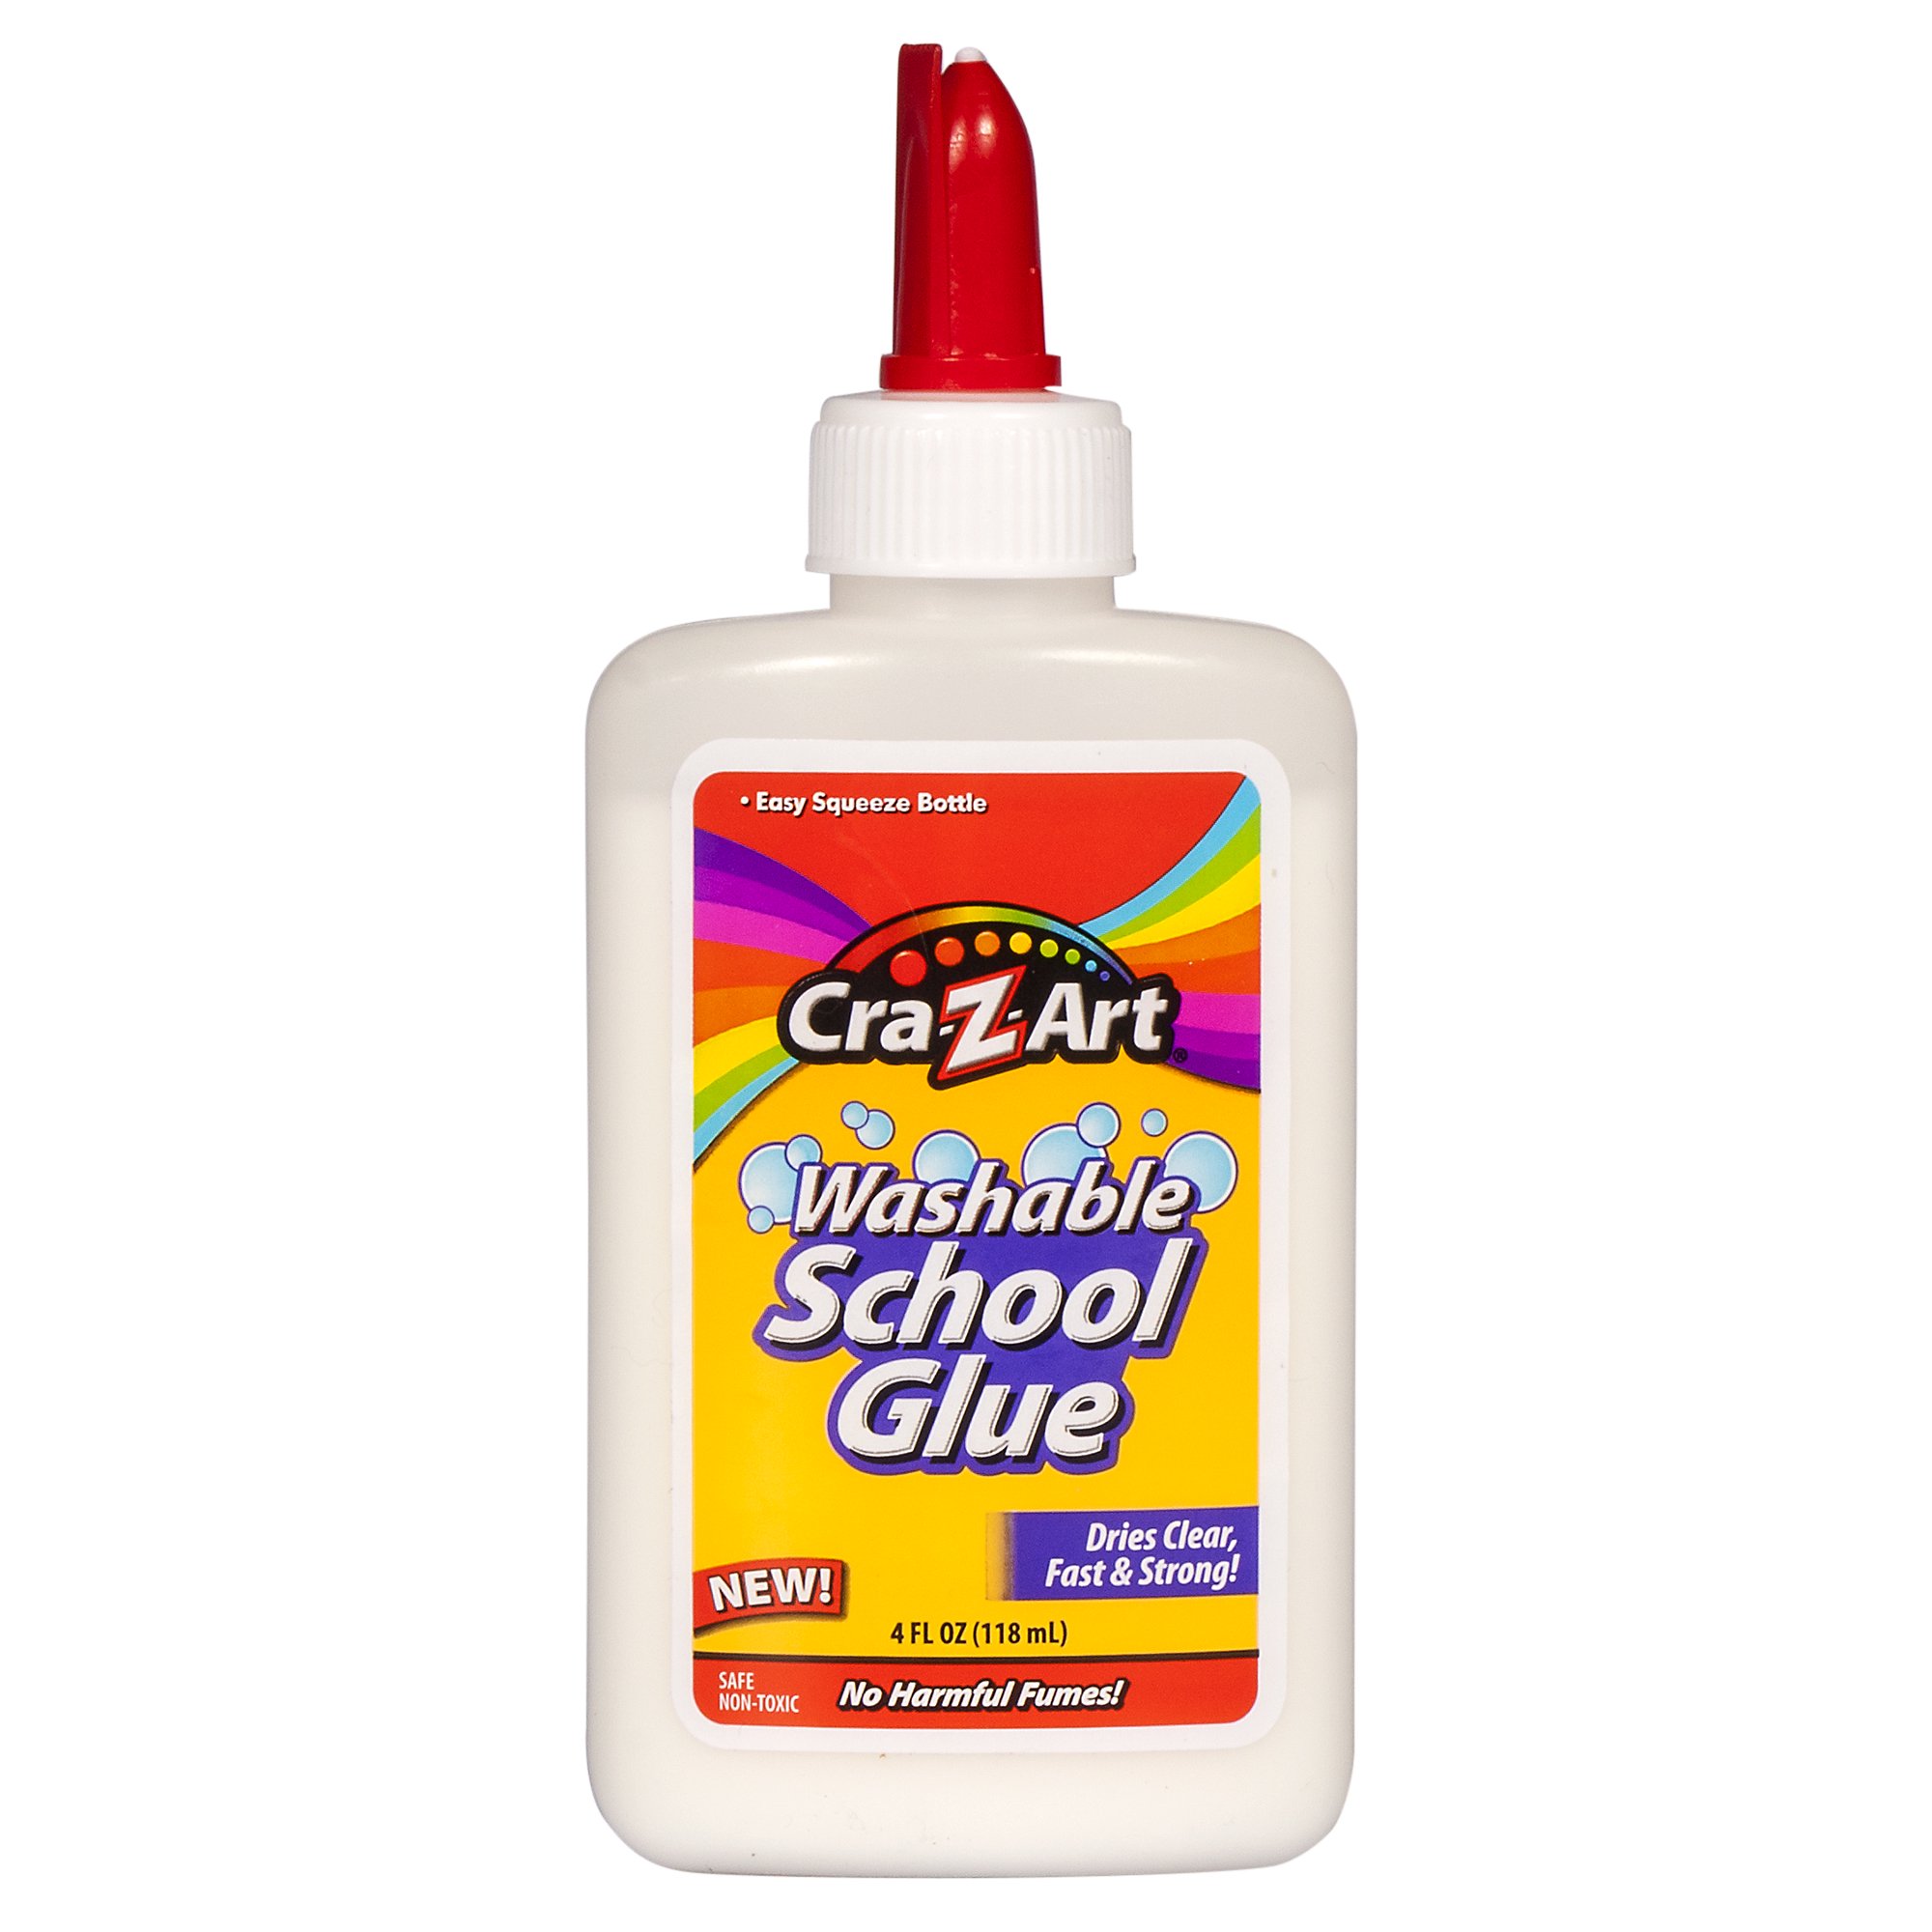 Cra-Z-Art Washable School Glue, 4oz White, Assembled Product Weight 0.4lb - image 1 of 9